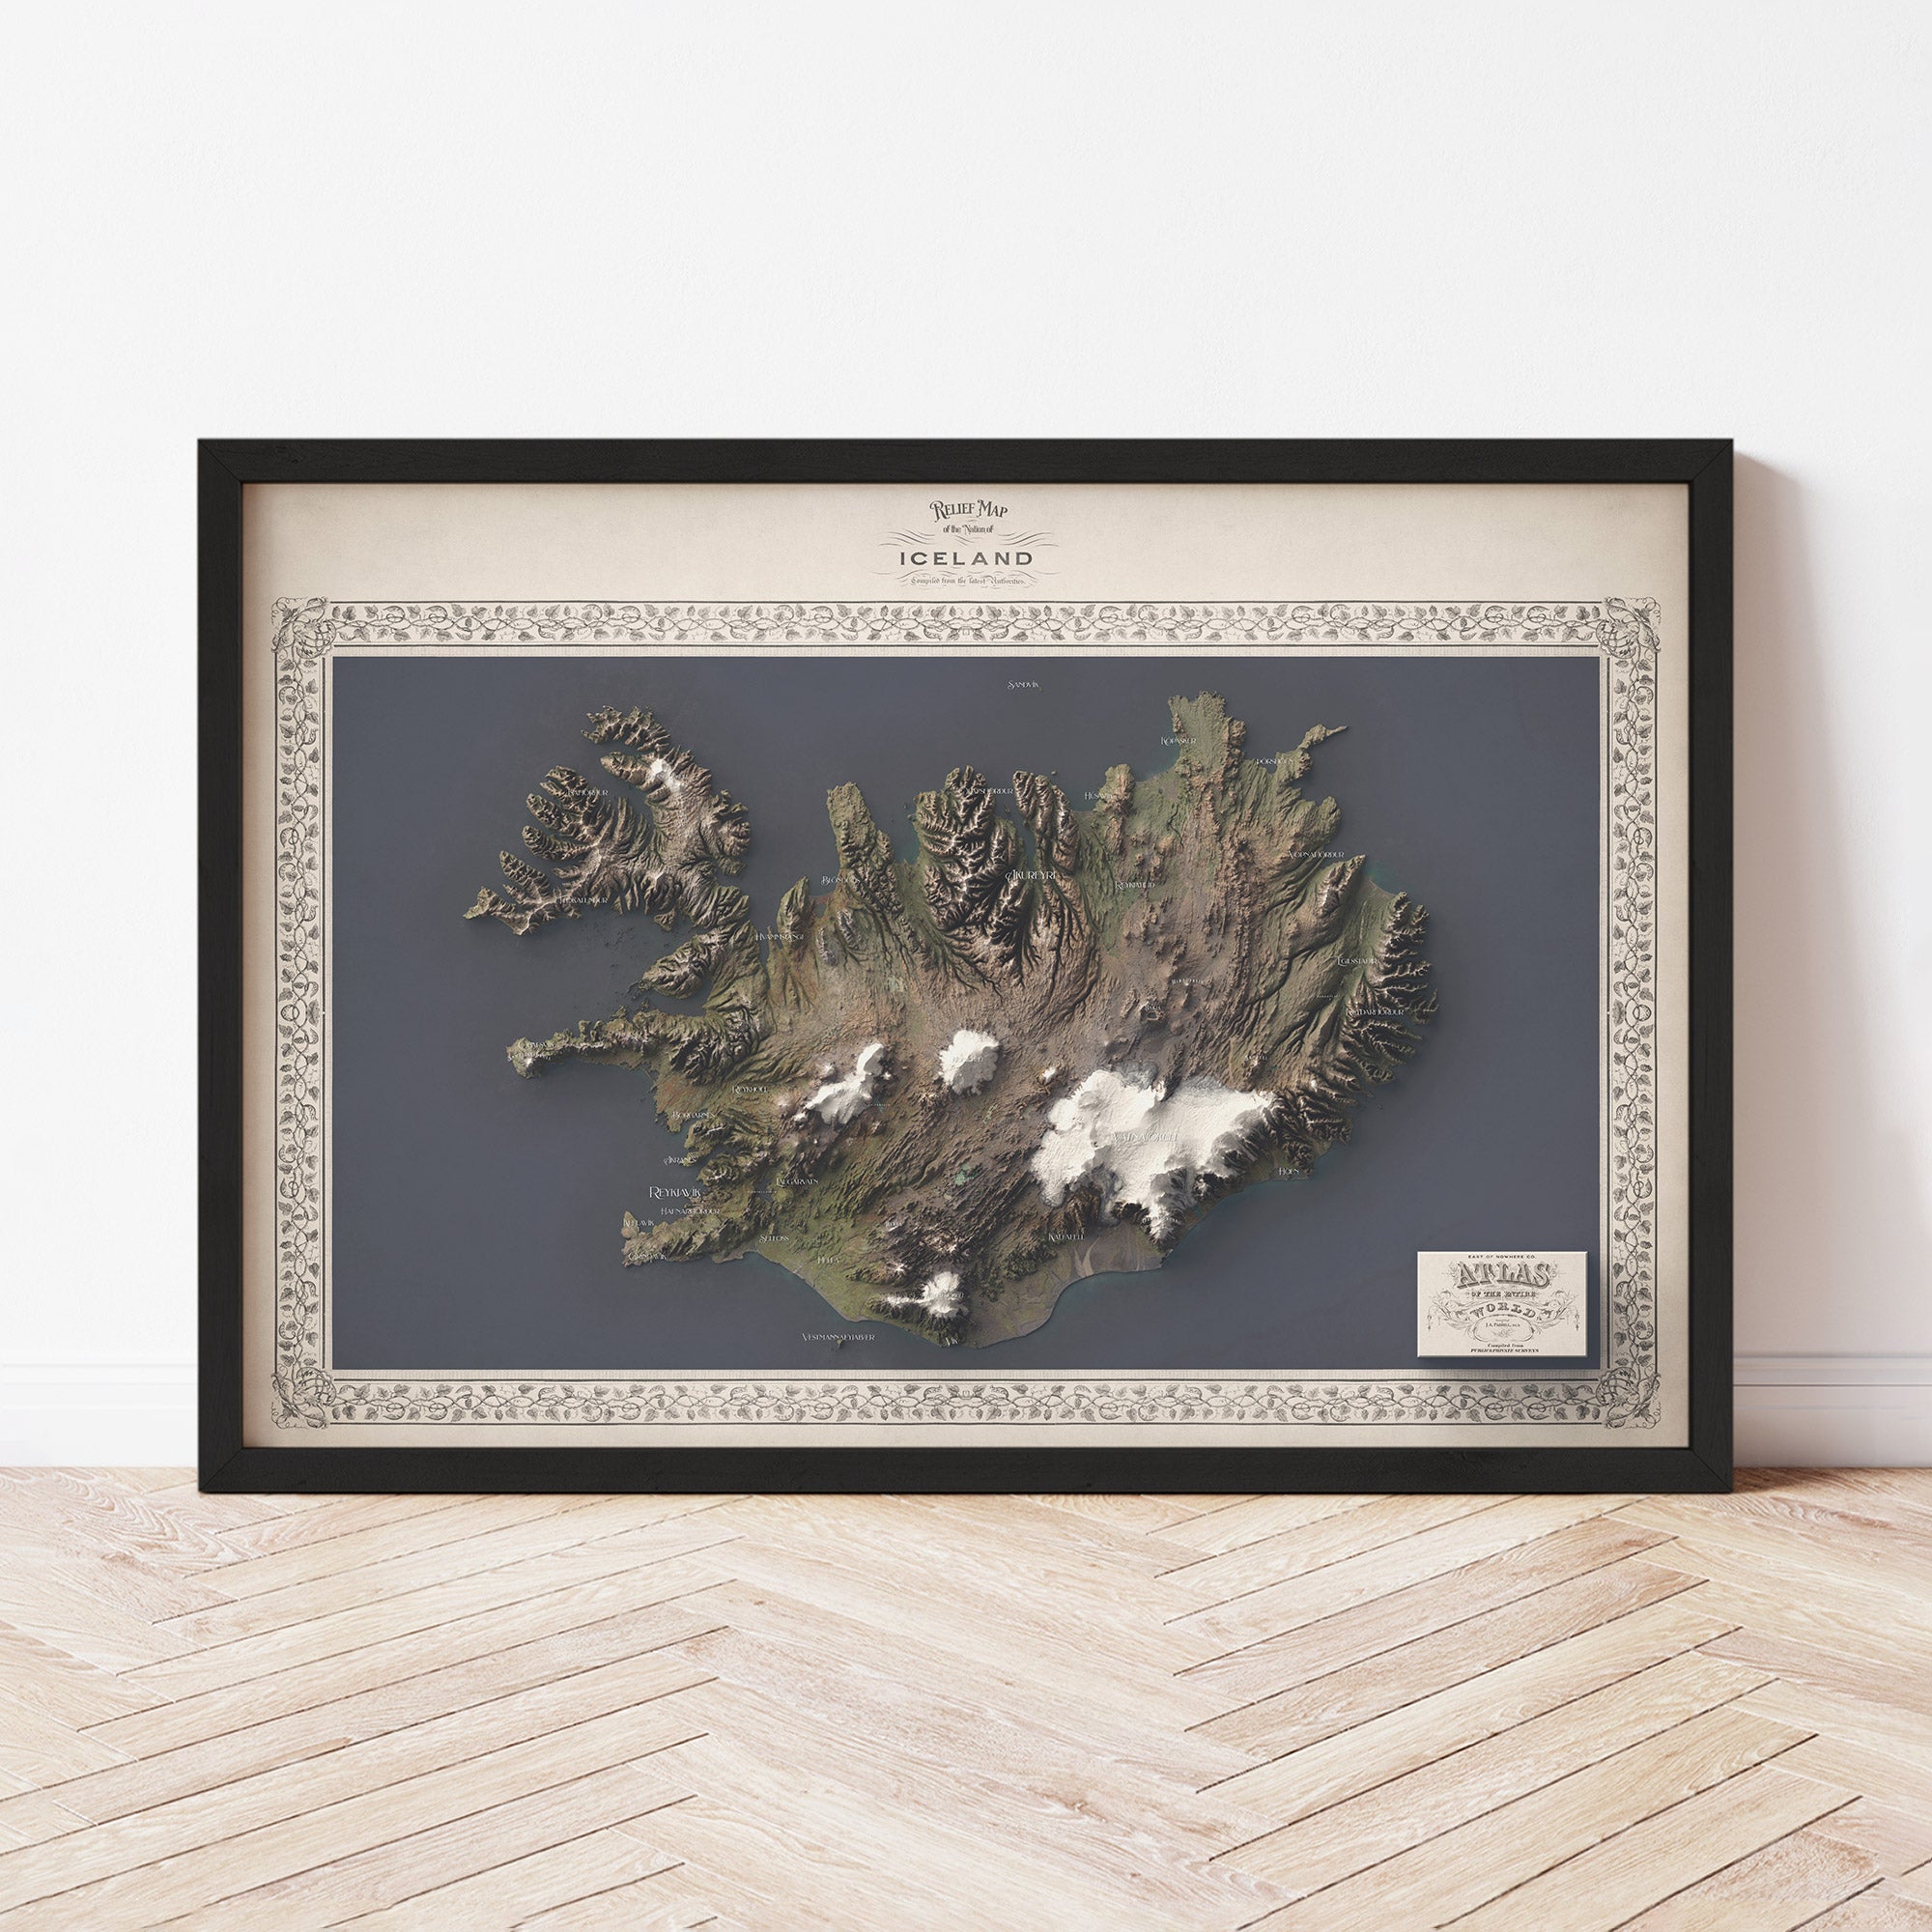 Iceland Map - The East of Nowhere World Atlas